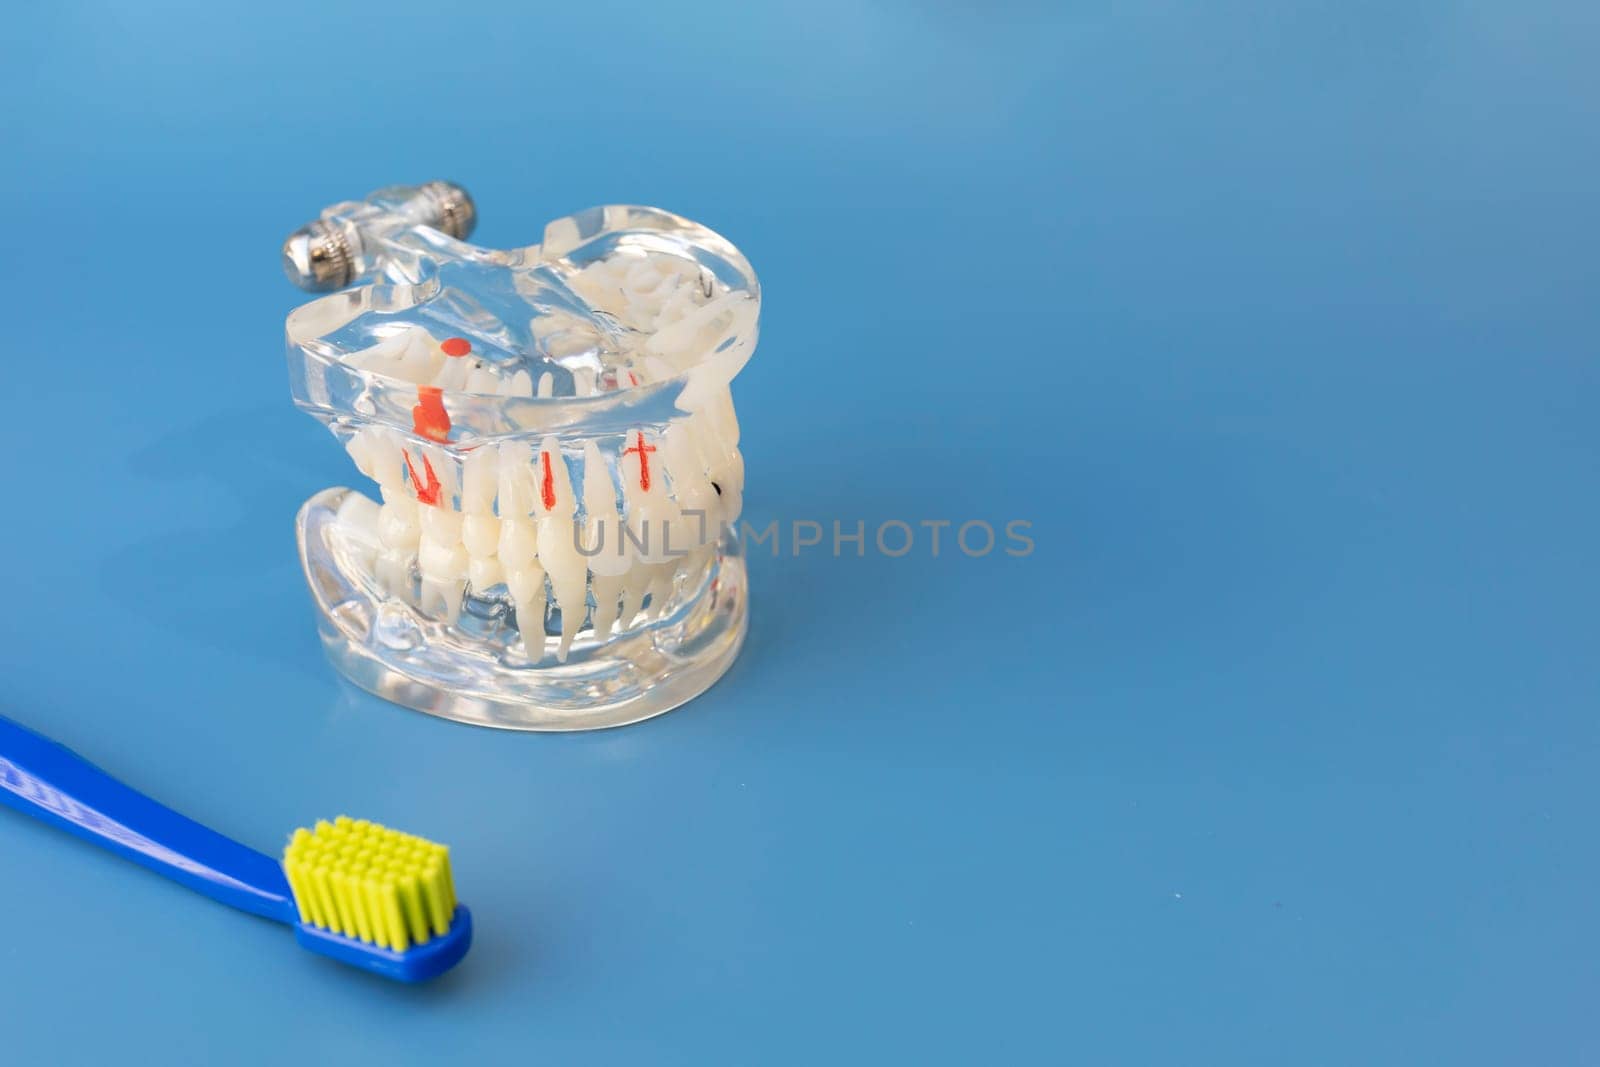 Transparent Pathological Tooth Model. Dental Education Implant Equipment And Toothbrush on Blue Background. Copy Space For text. Horizontal Mockup. Dentistry and Oral Health. by netatsi